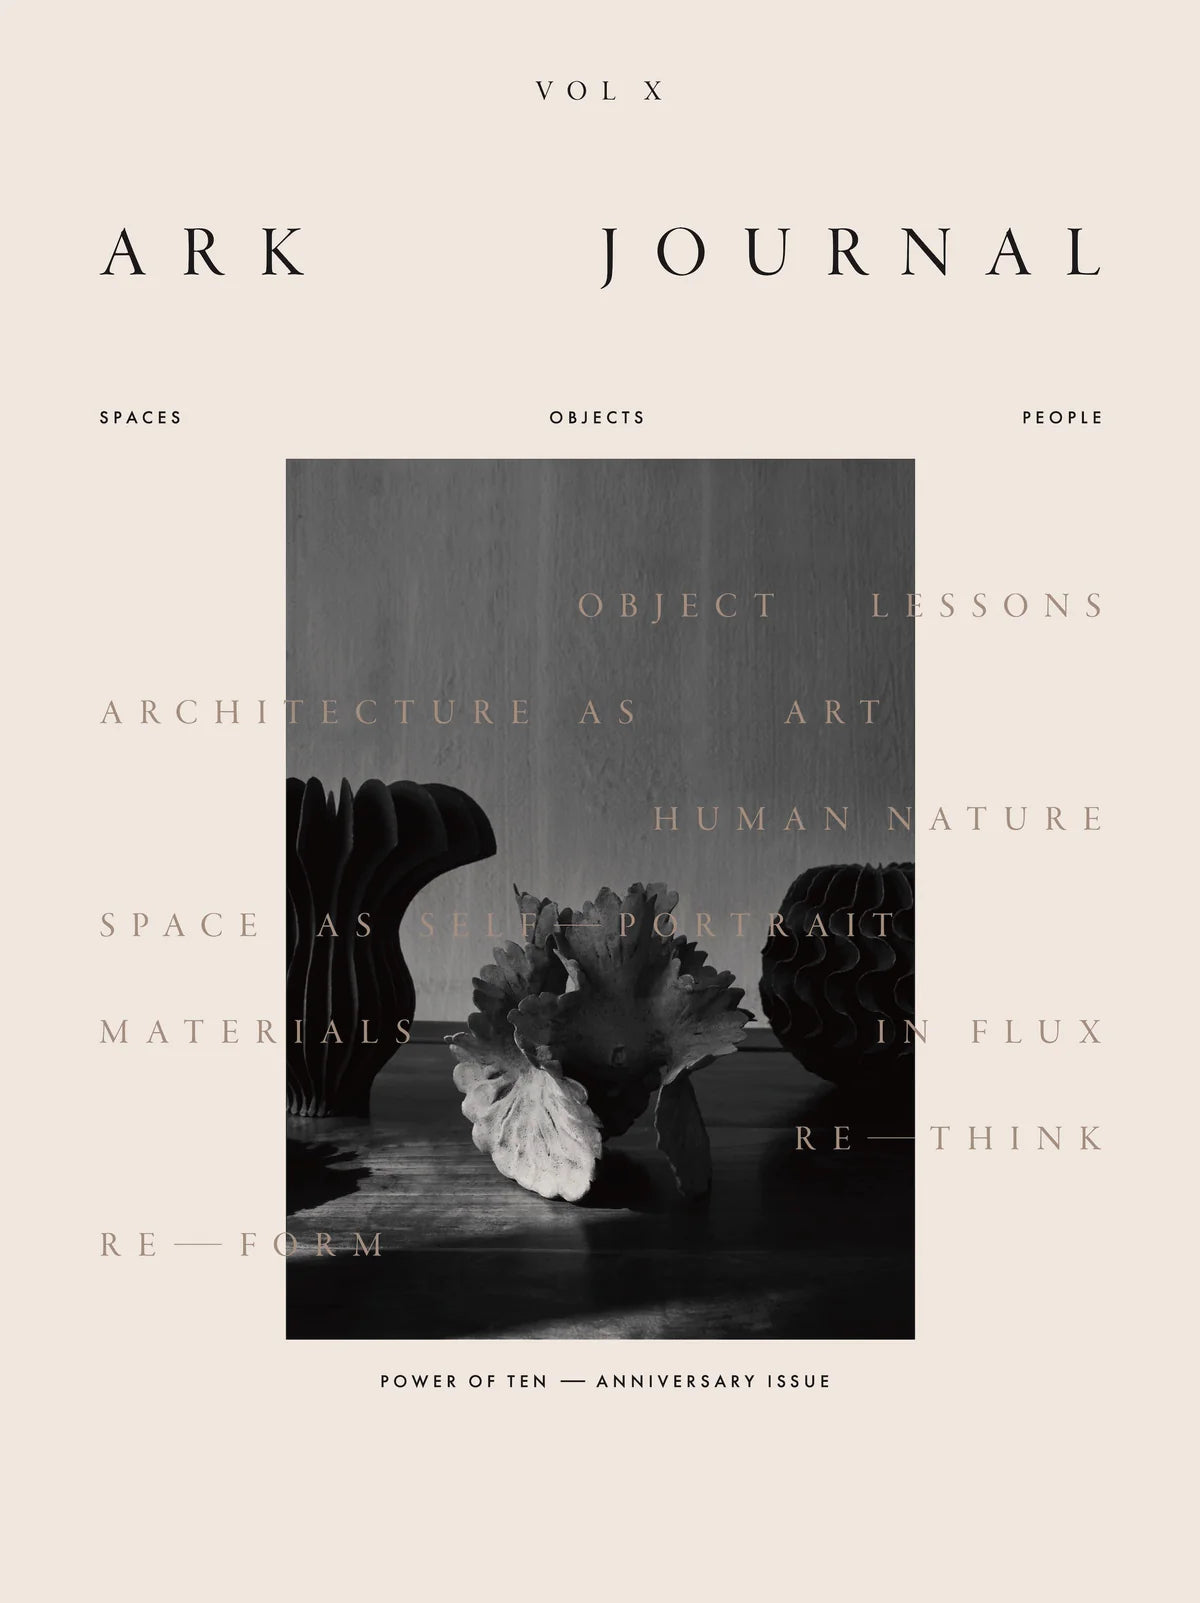 Ark Journal Vol. X in cover version 3